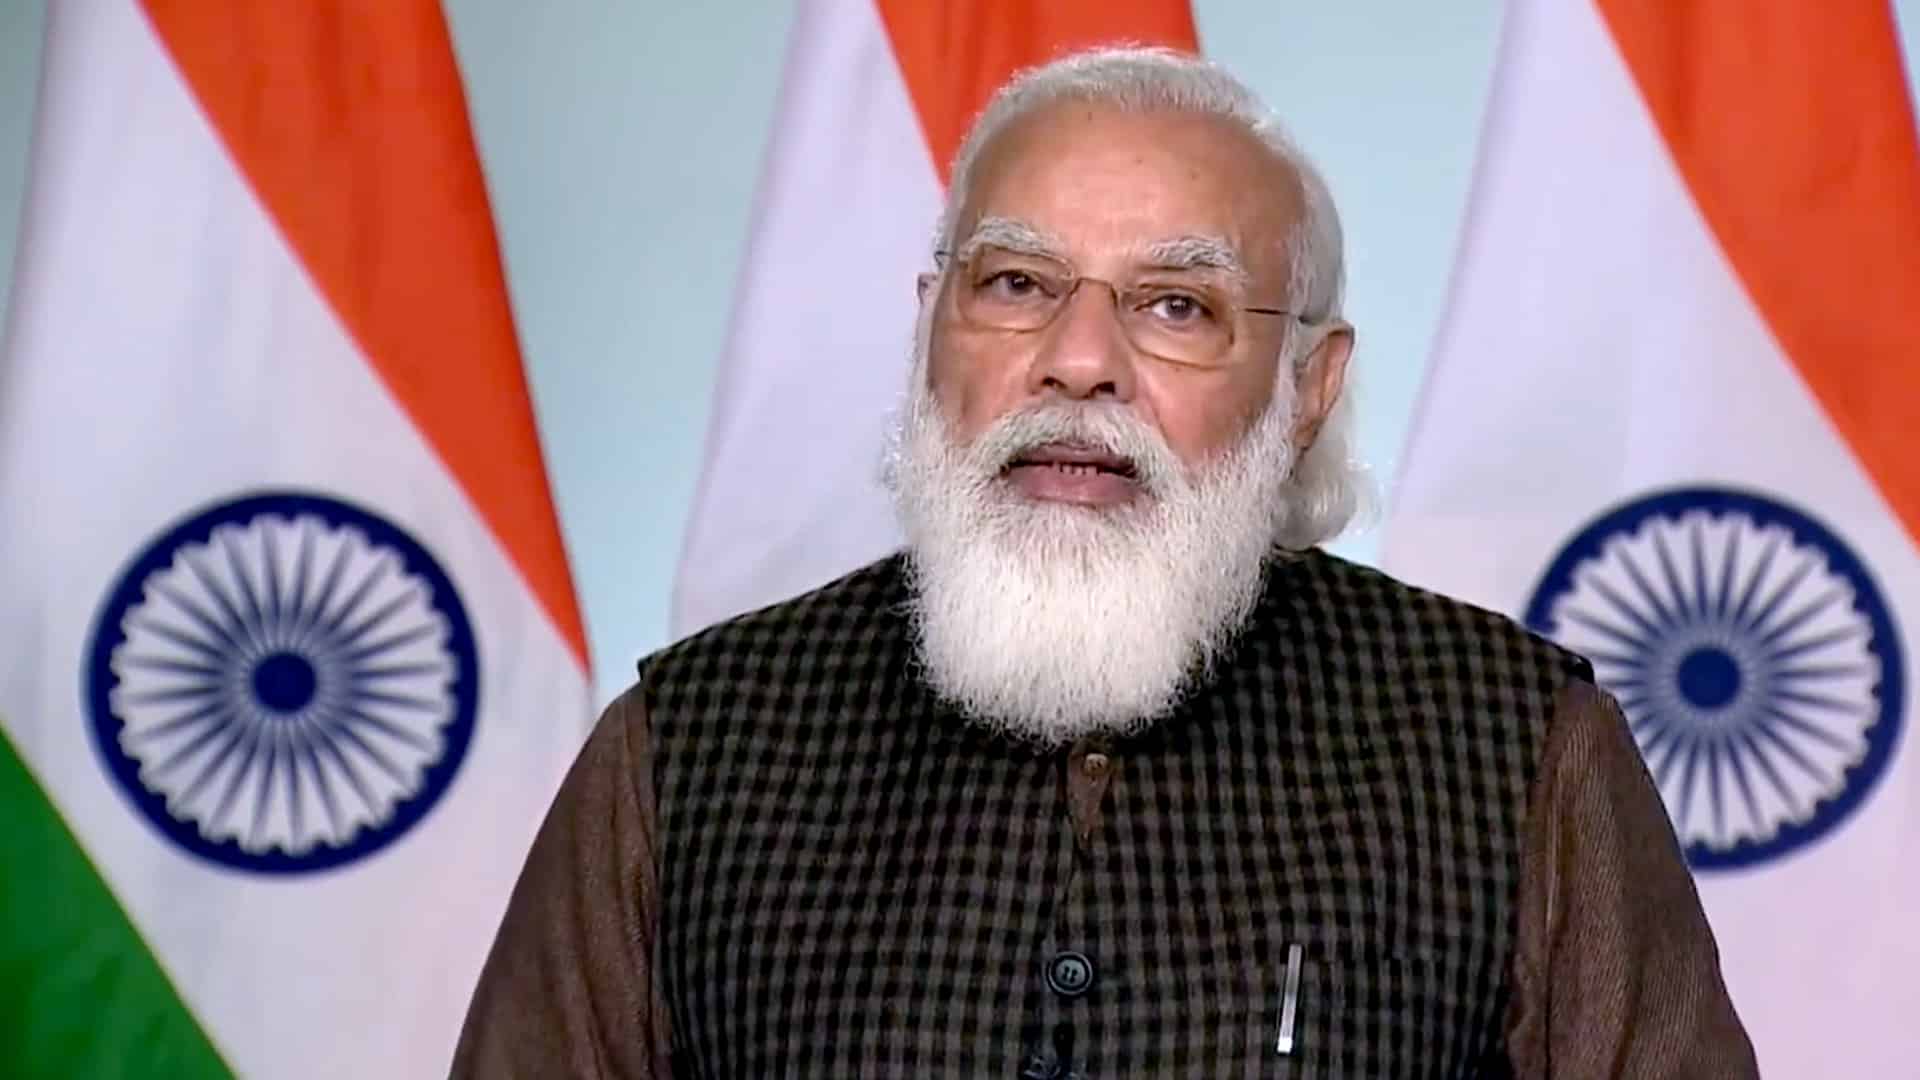 India committed to move forward with goal of clean, modern mobility: PM Modi